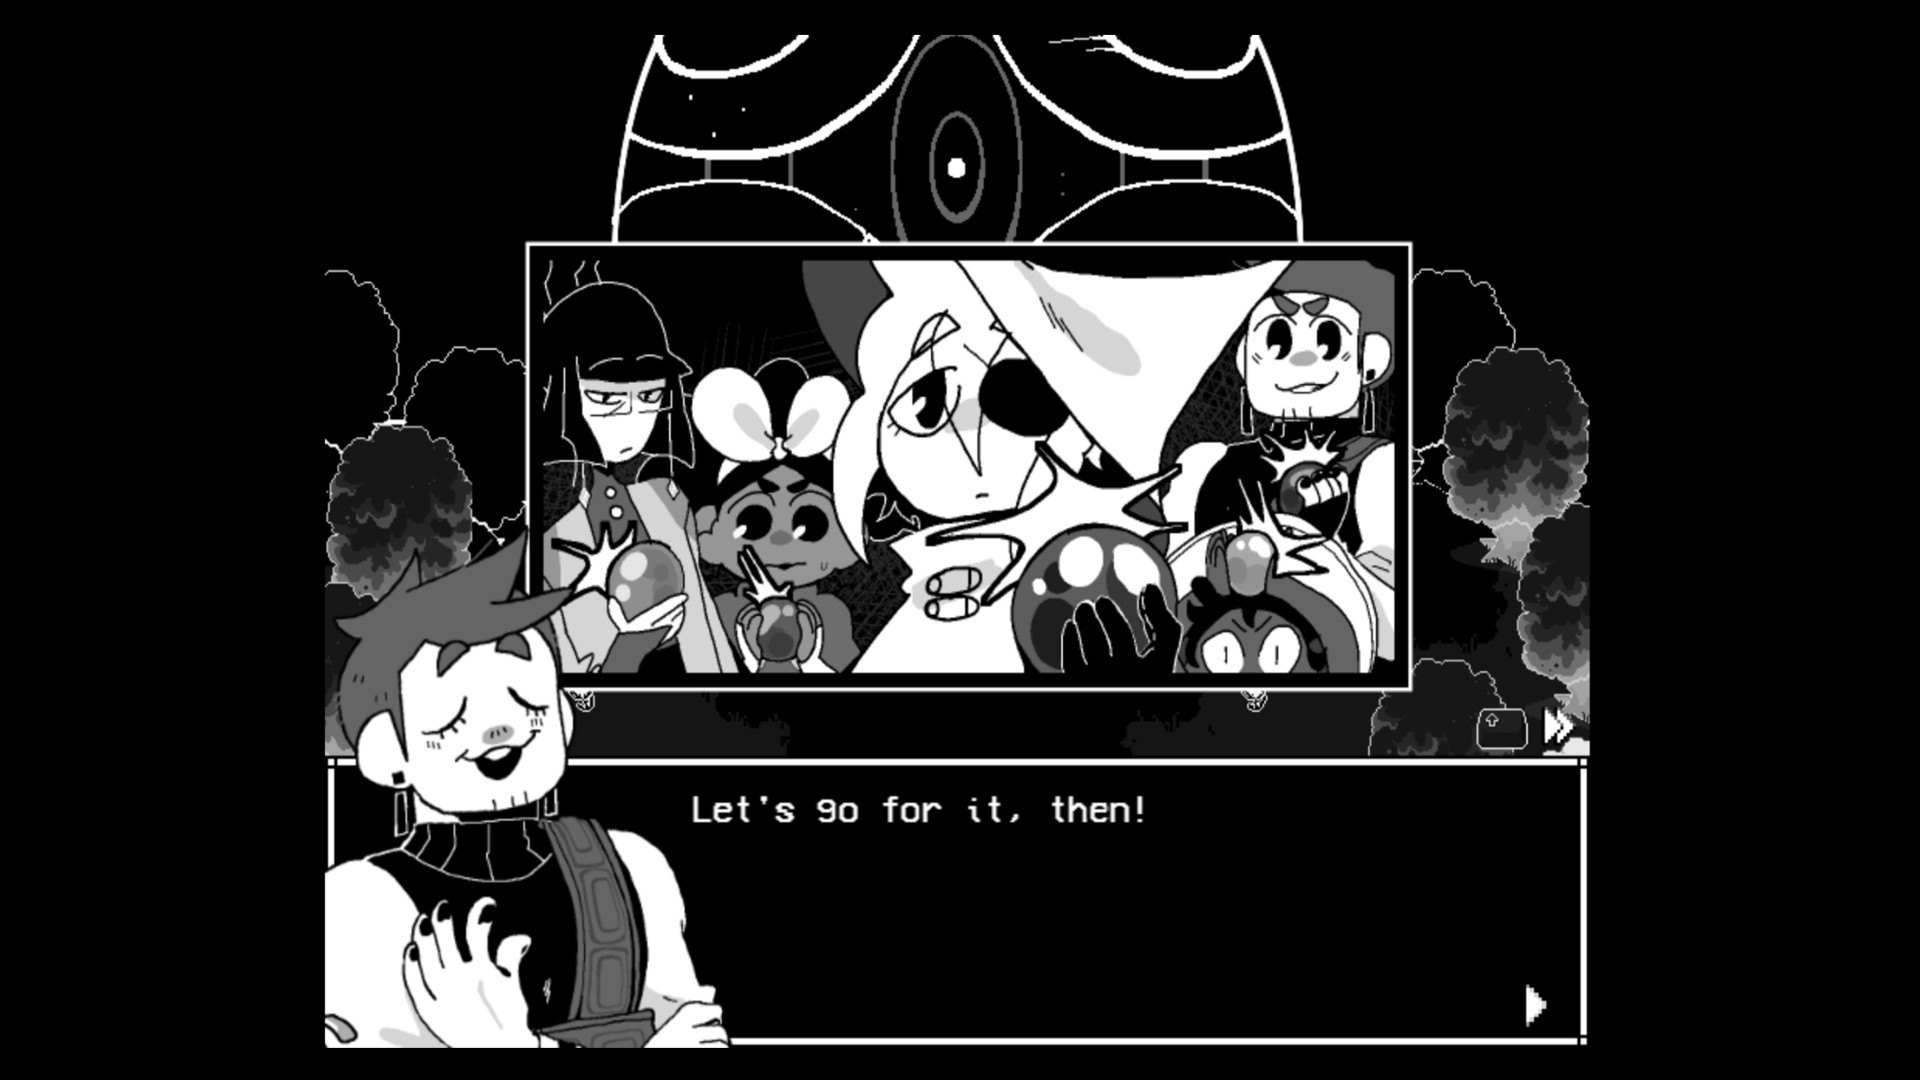 Screenshot of the In Stars and Time cast with dialogue that says "let's go for it, then!"